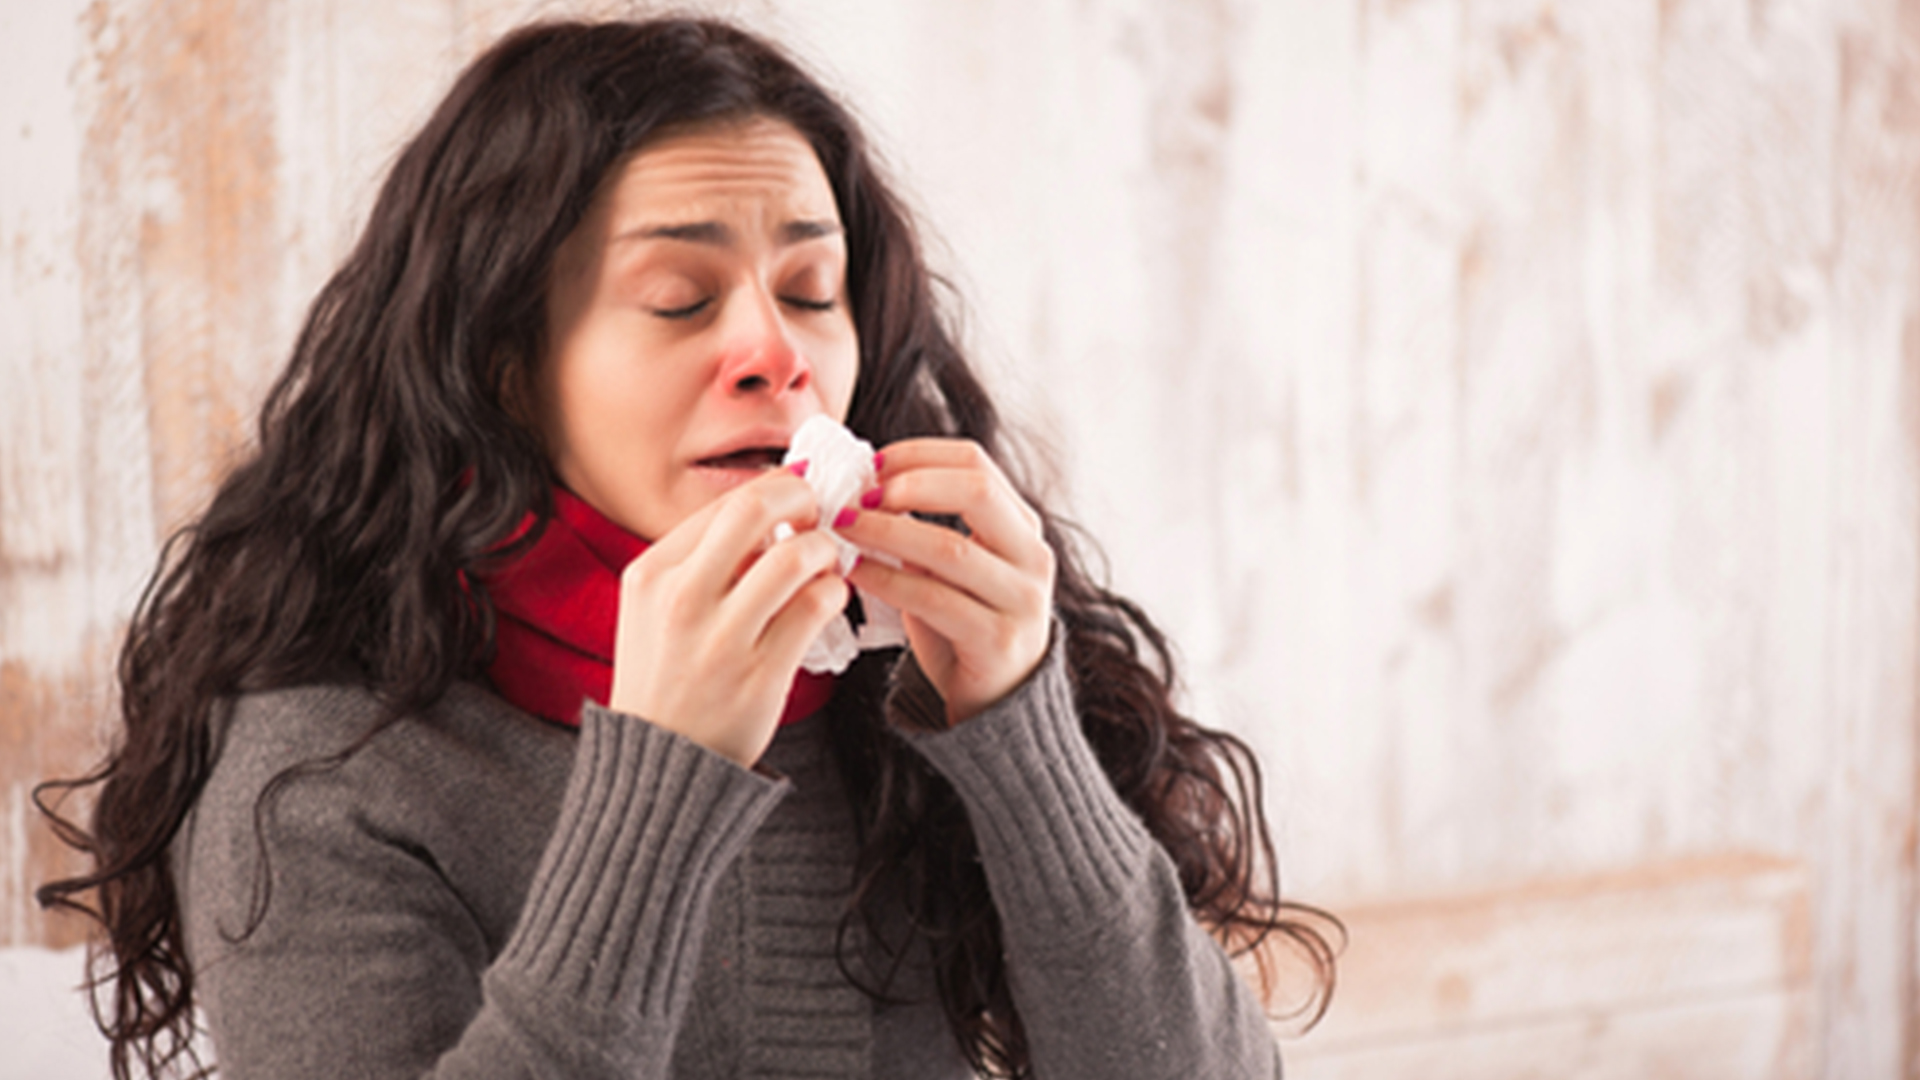 How To Manage/Prevent Seasonal Allergies